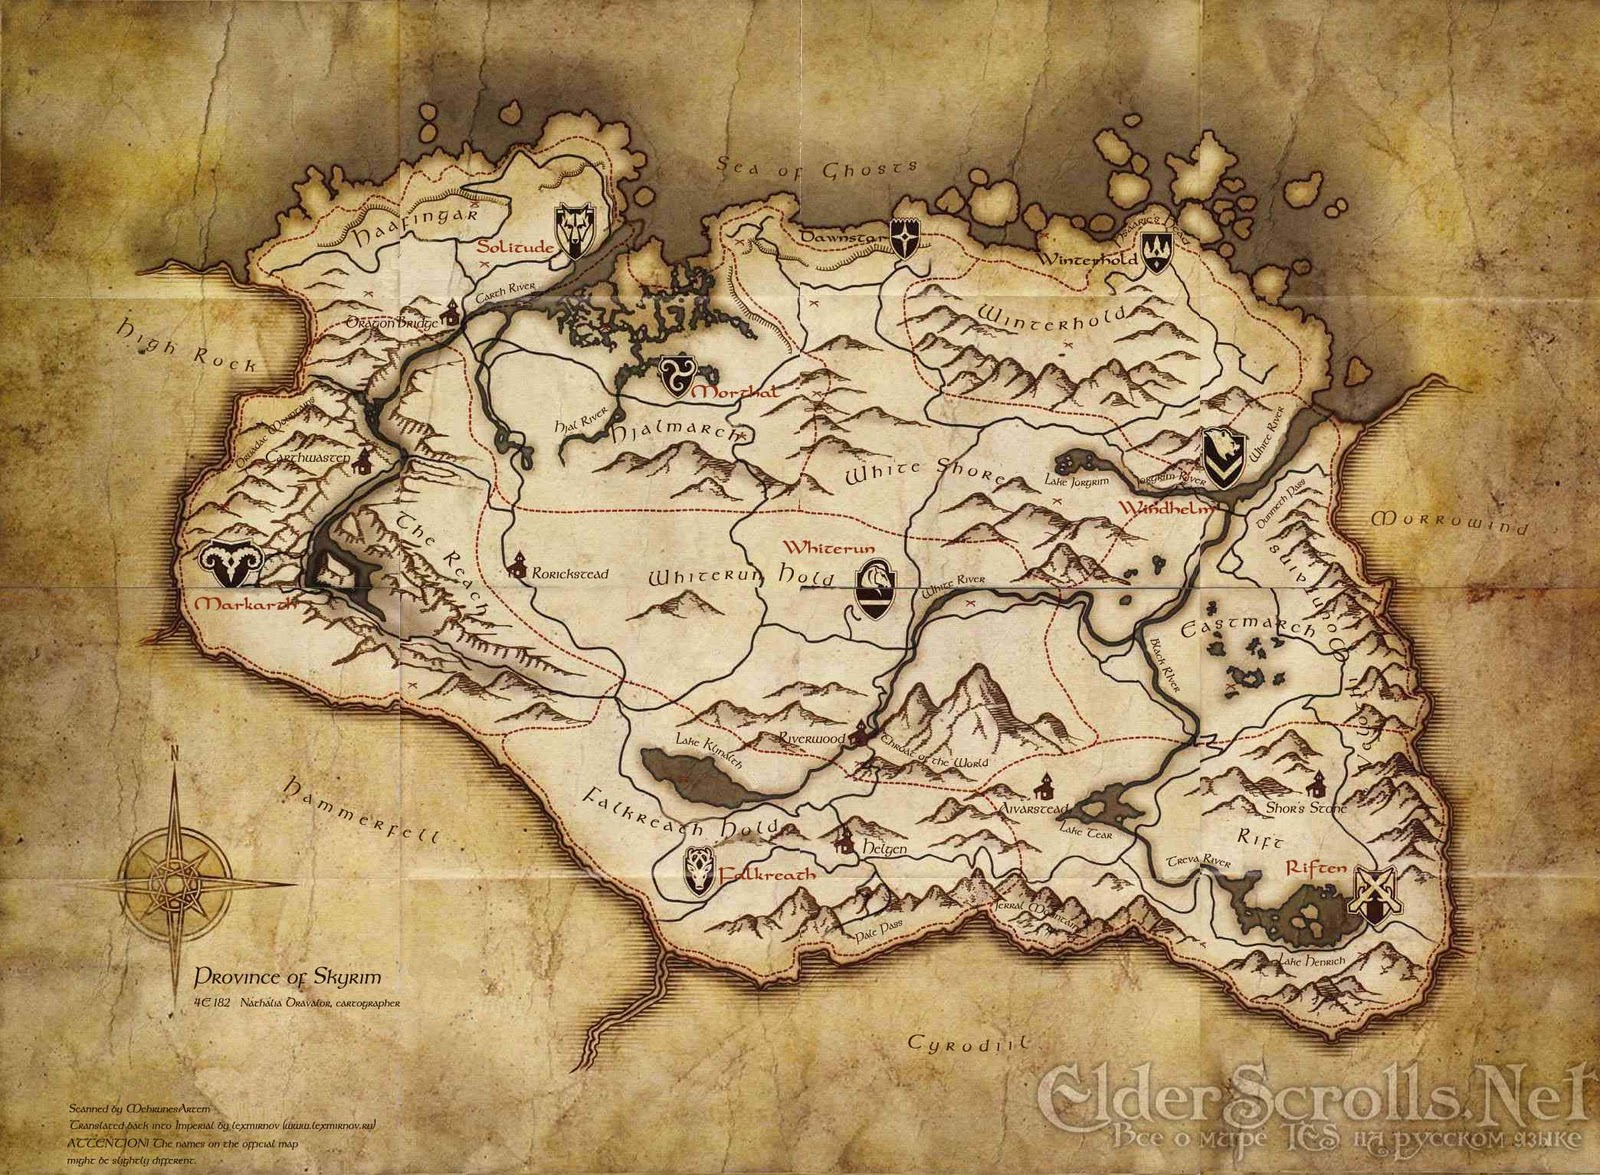 Skyrim’s world map revealed in English